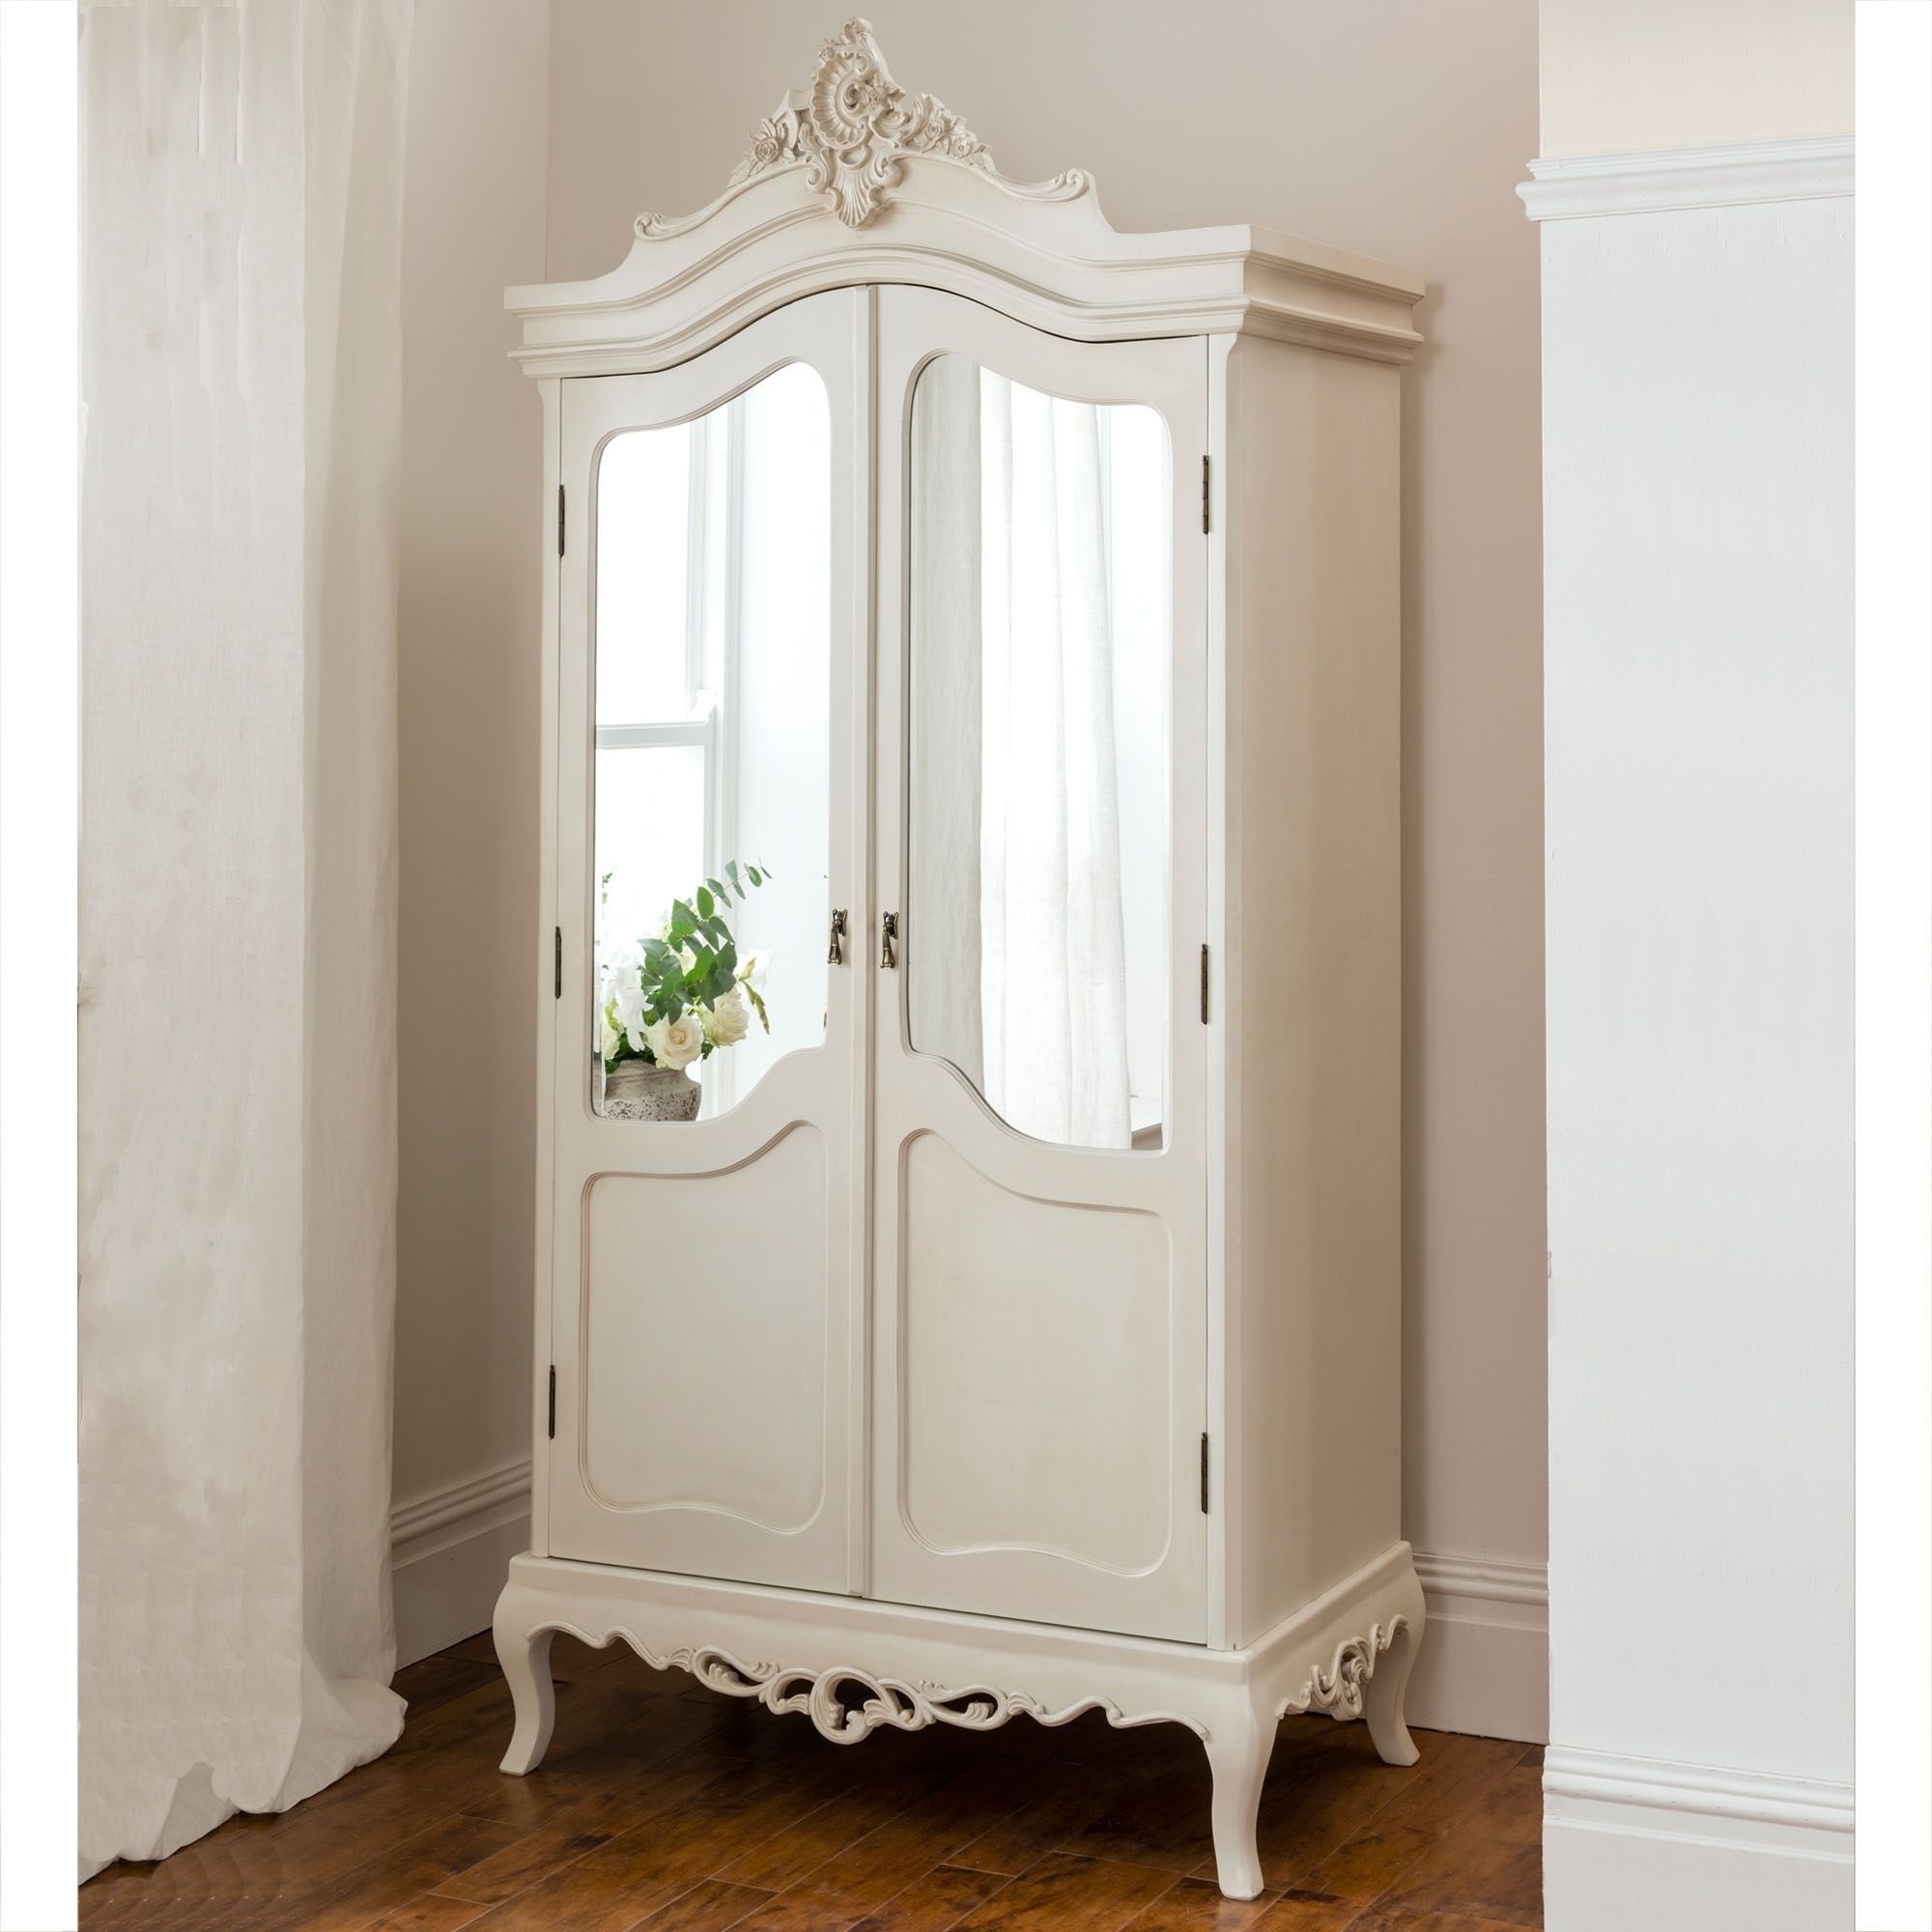 Annaelle Antique French Wardrobe Inside White French Style Wardrobes (View 17 of 20)